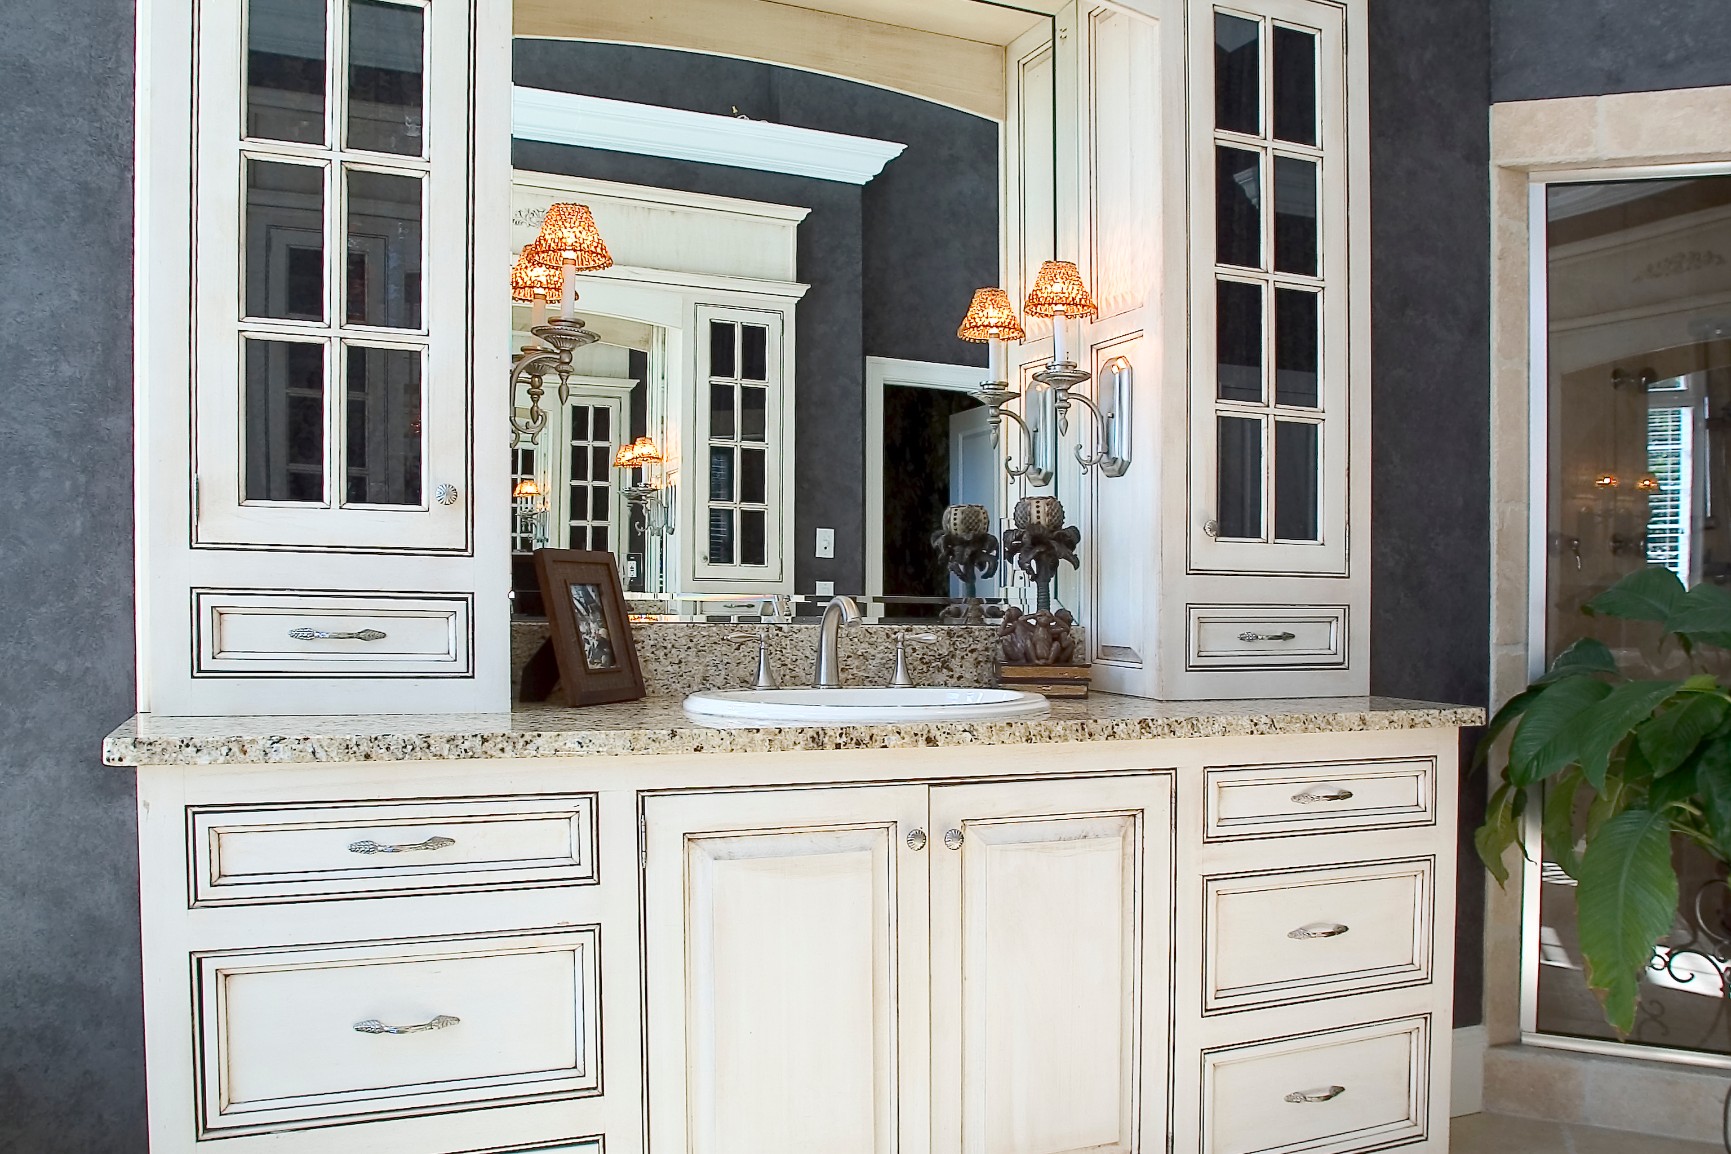 Baths Wood Hollow Cabinets